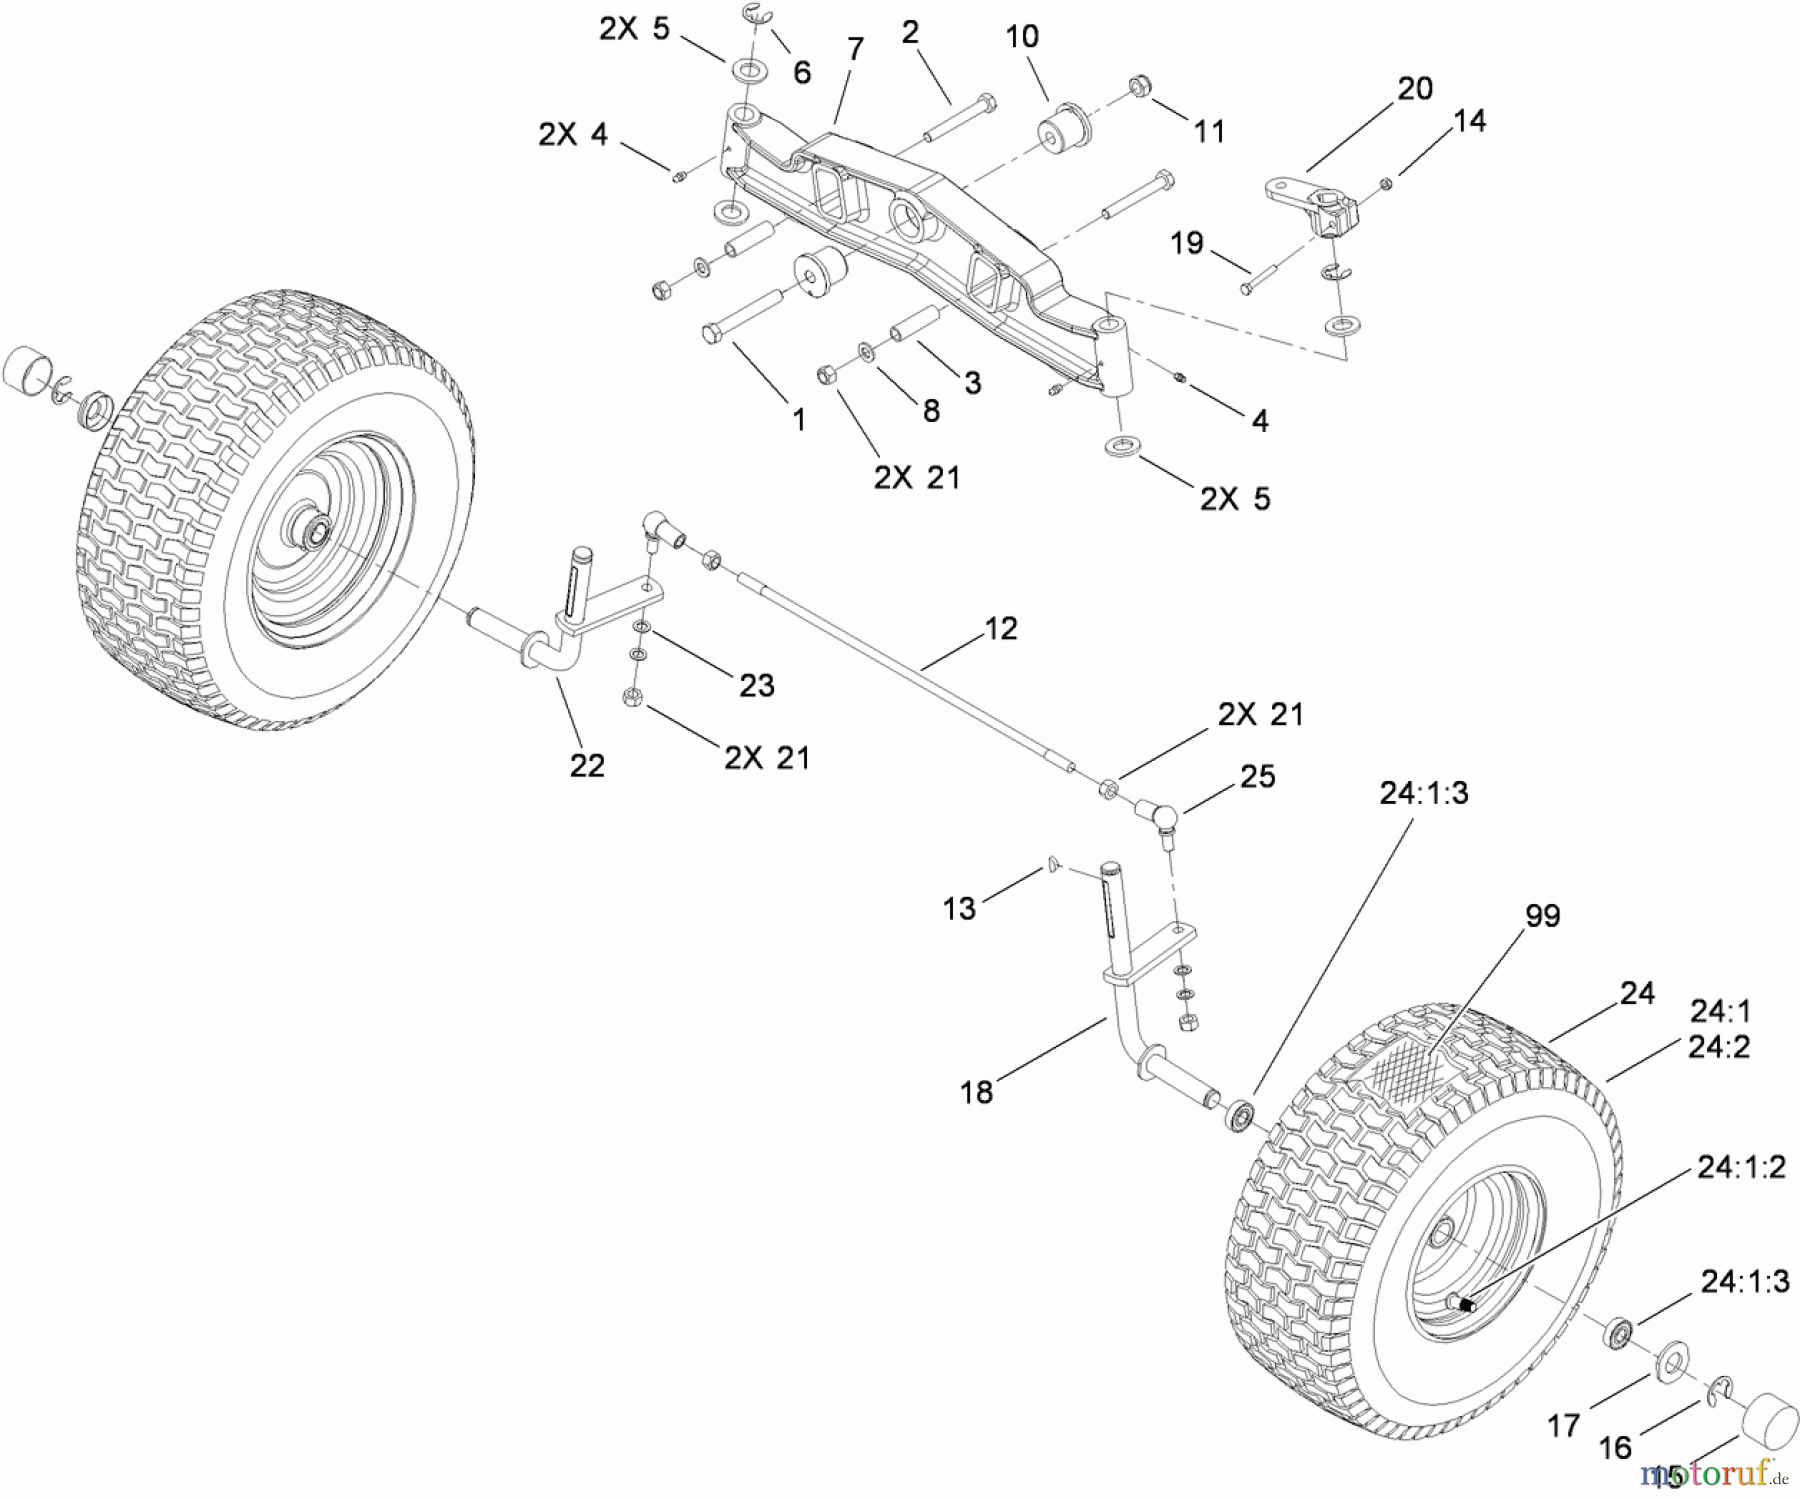  Toro Neu Mowers, Lawn & Garden Tractor Seite 1 74573 (DH 200) - Toro DH 200 Lawn Tractor, 2010 (310000001-310999999) FRONT AXLE ASSEMBLY